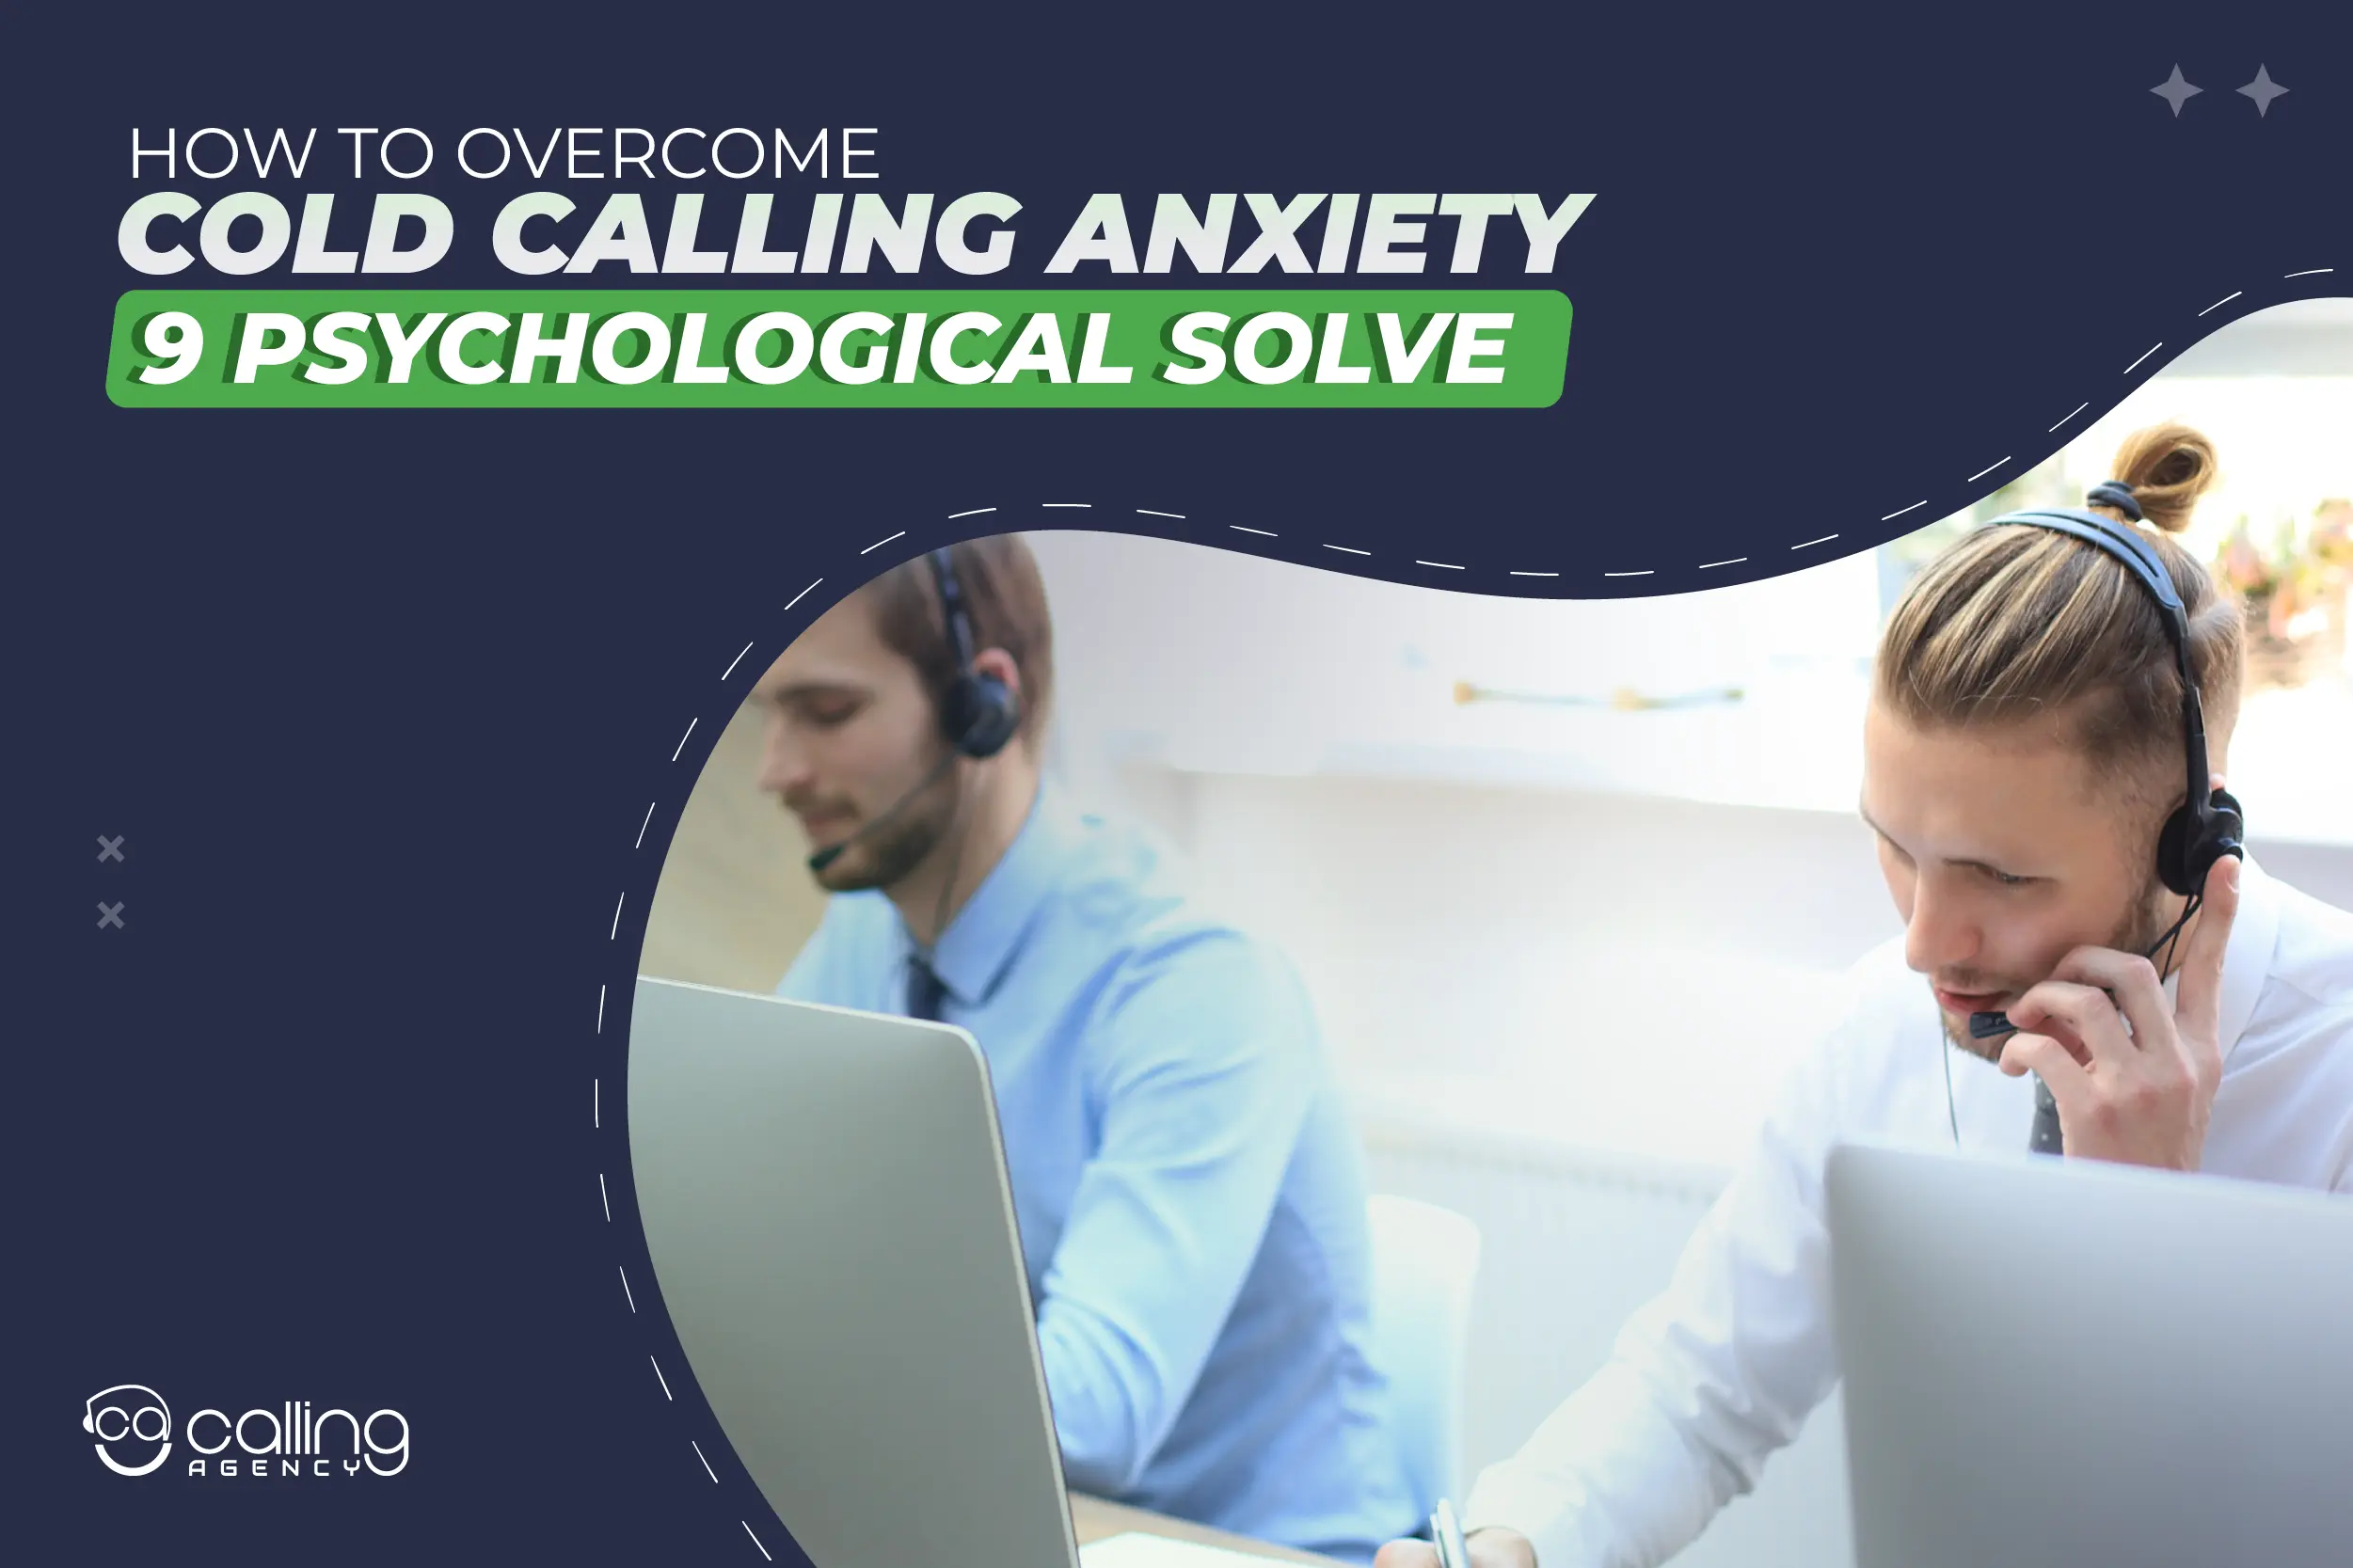 How to Overcome Cold Calling Anxiety